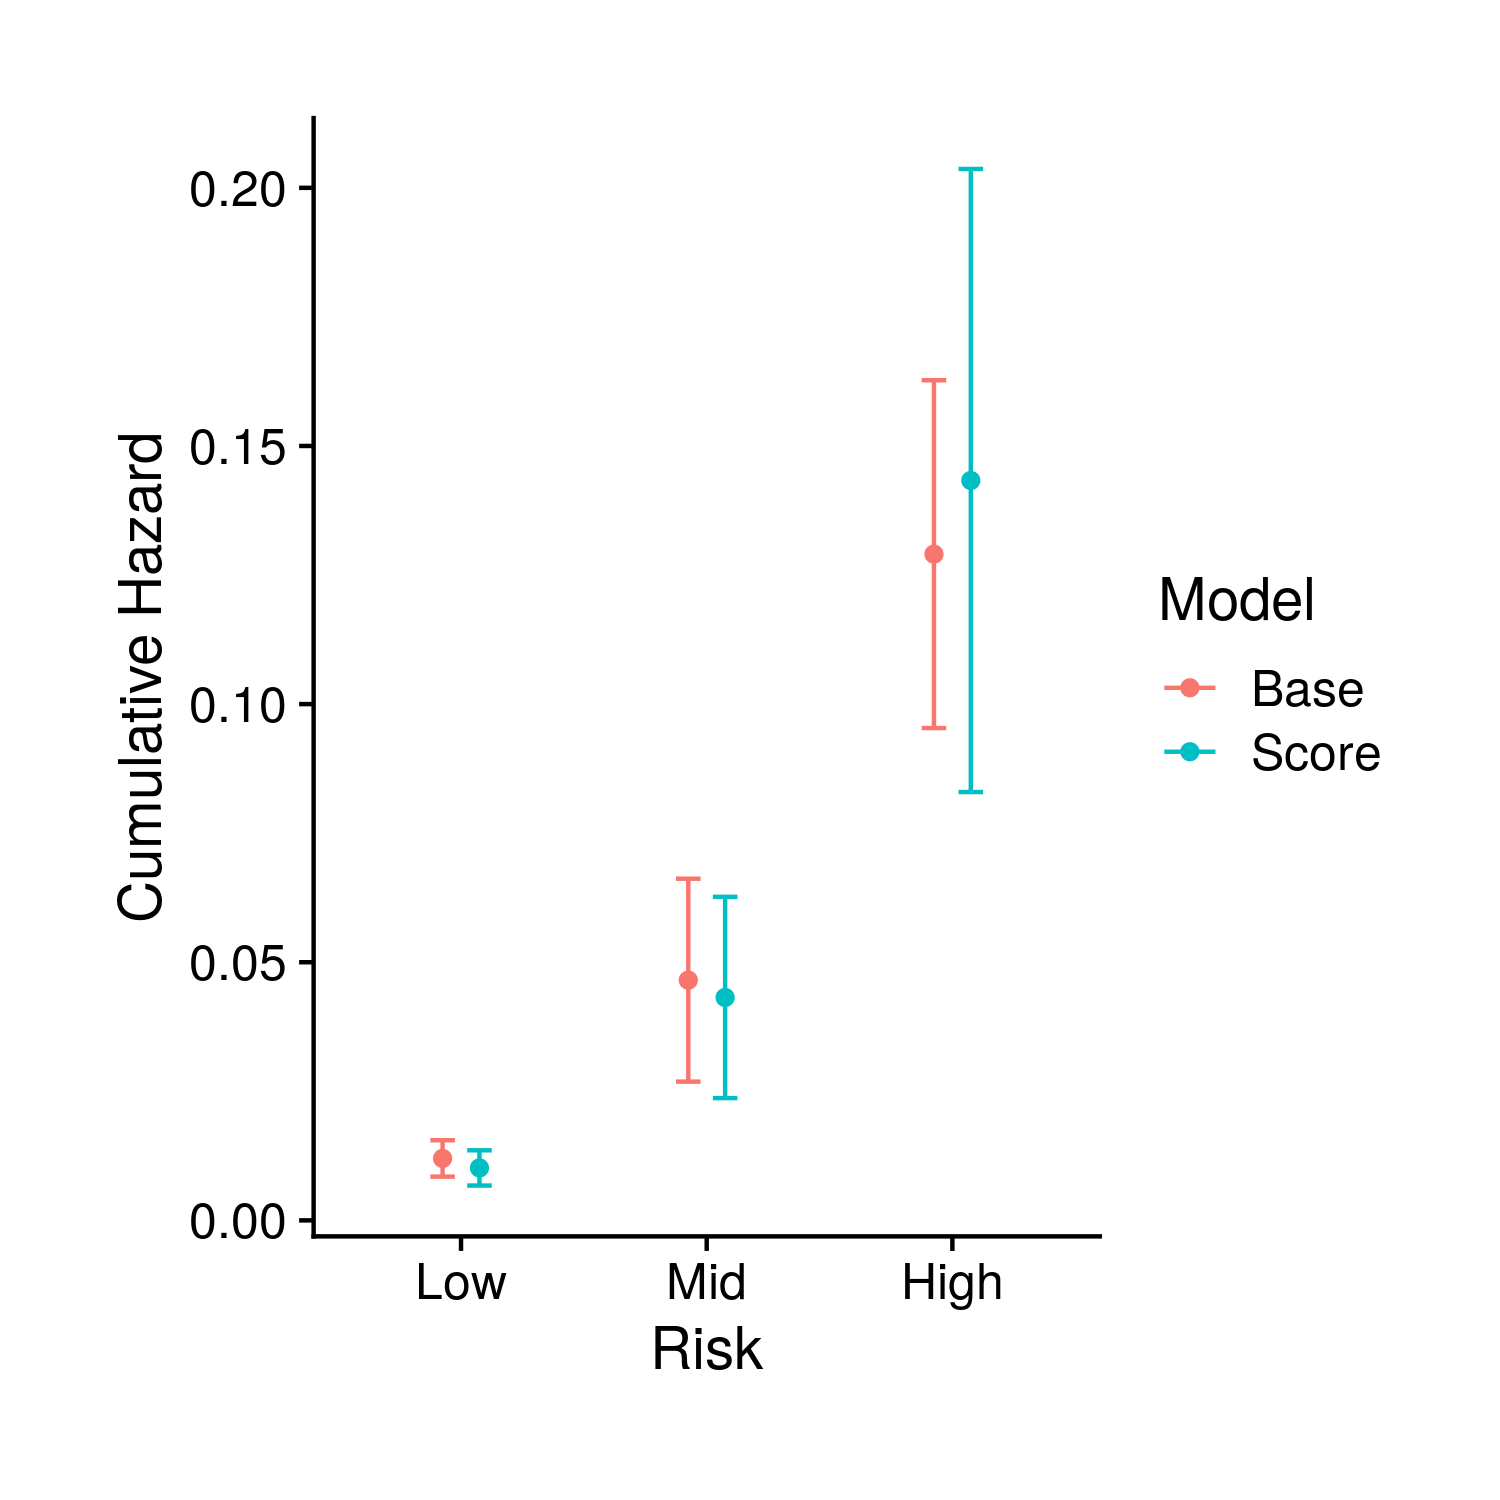 The estimed risk for the final time point in the previous plot, including confidence intervals